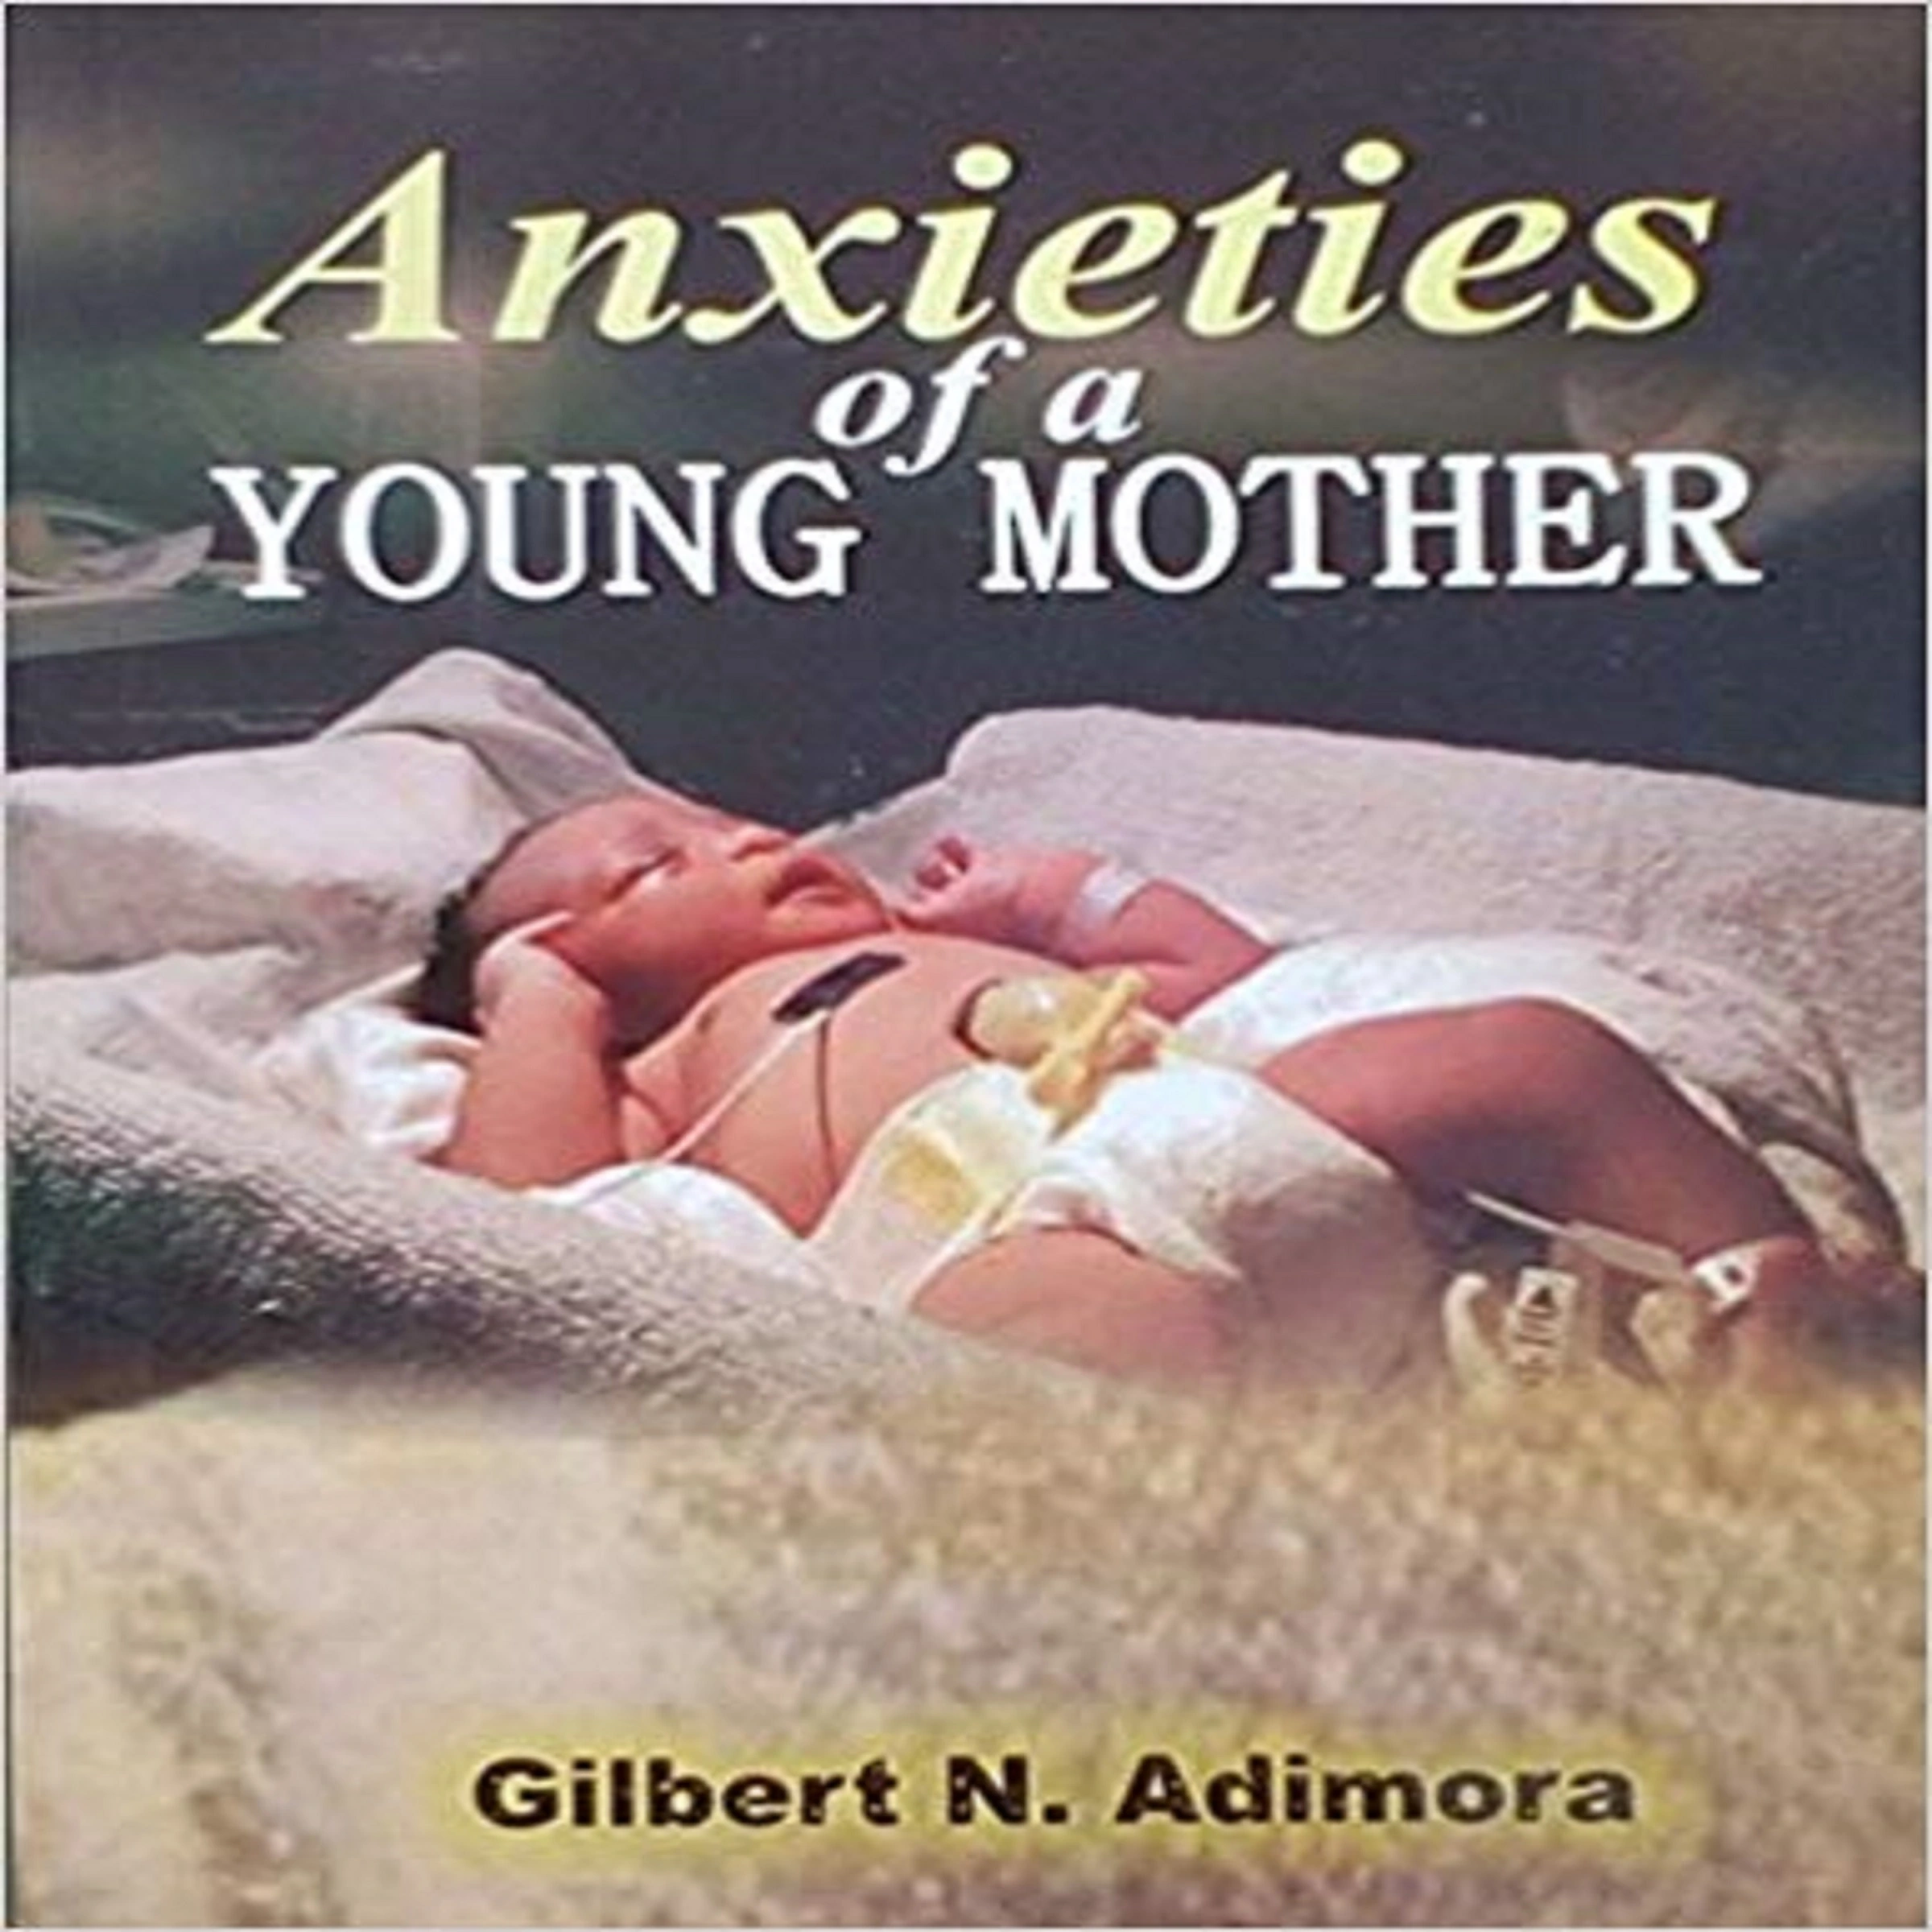 Anxieties of a young mother Audiobook by Gilbert Adimora